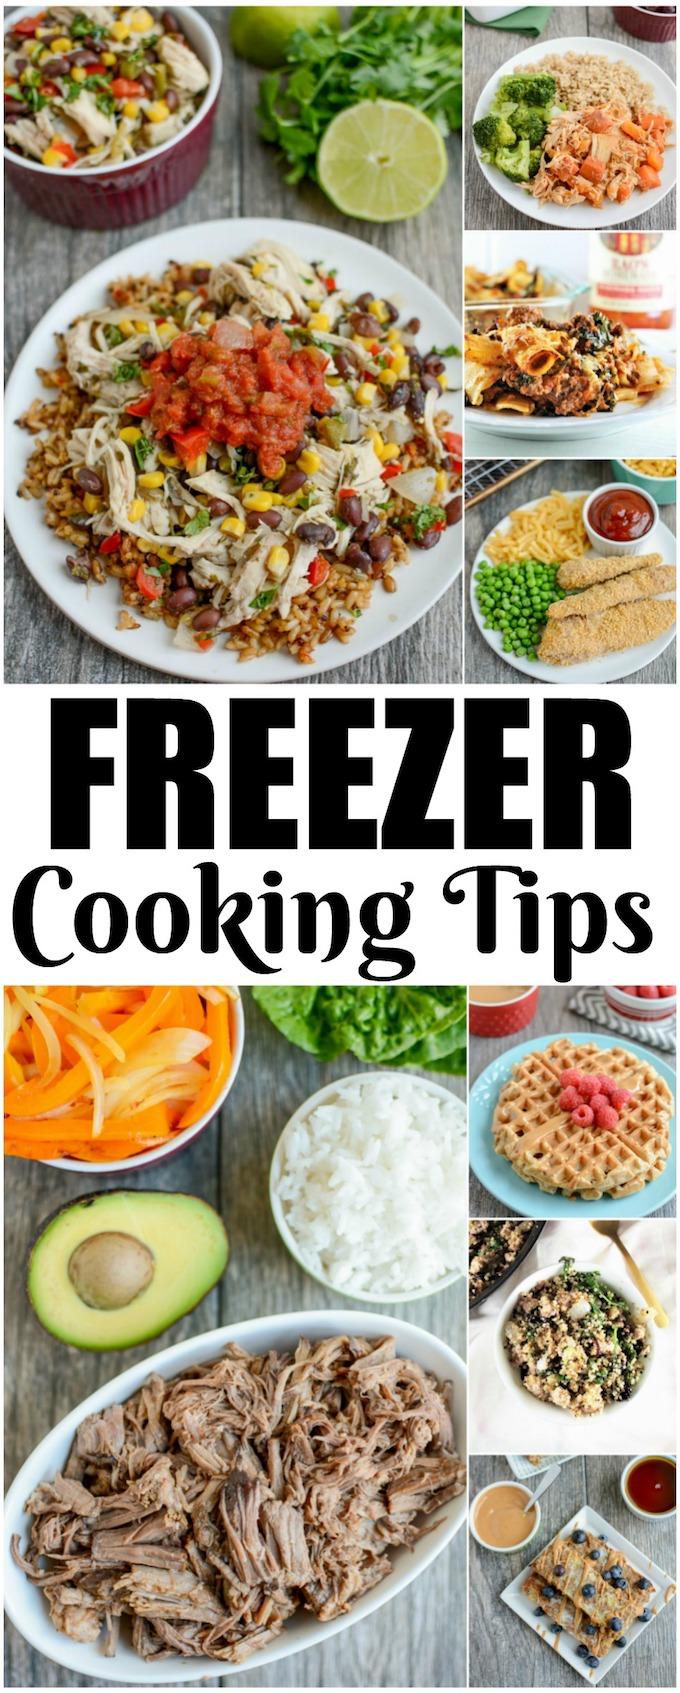 Looking for some Freezer Cooking Tips? These simple ideas from a Registered Dietitian will teach you how to make freezer cooking work for you by saving time and reducing stress during a busy week.